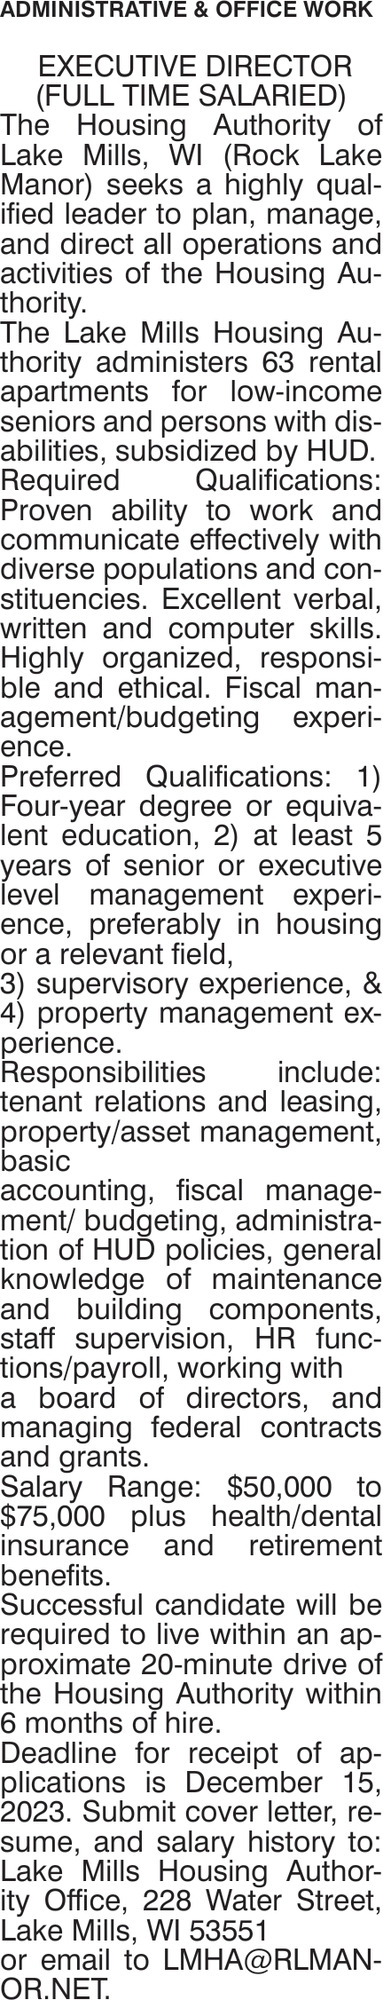 Property Management Careers in Wisconsin / Apply Today